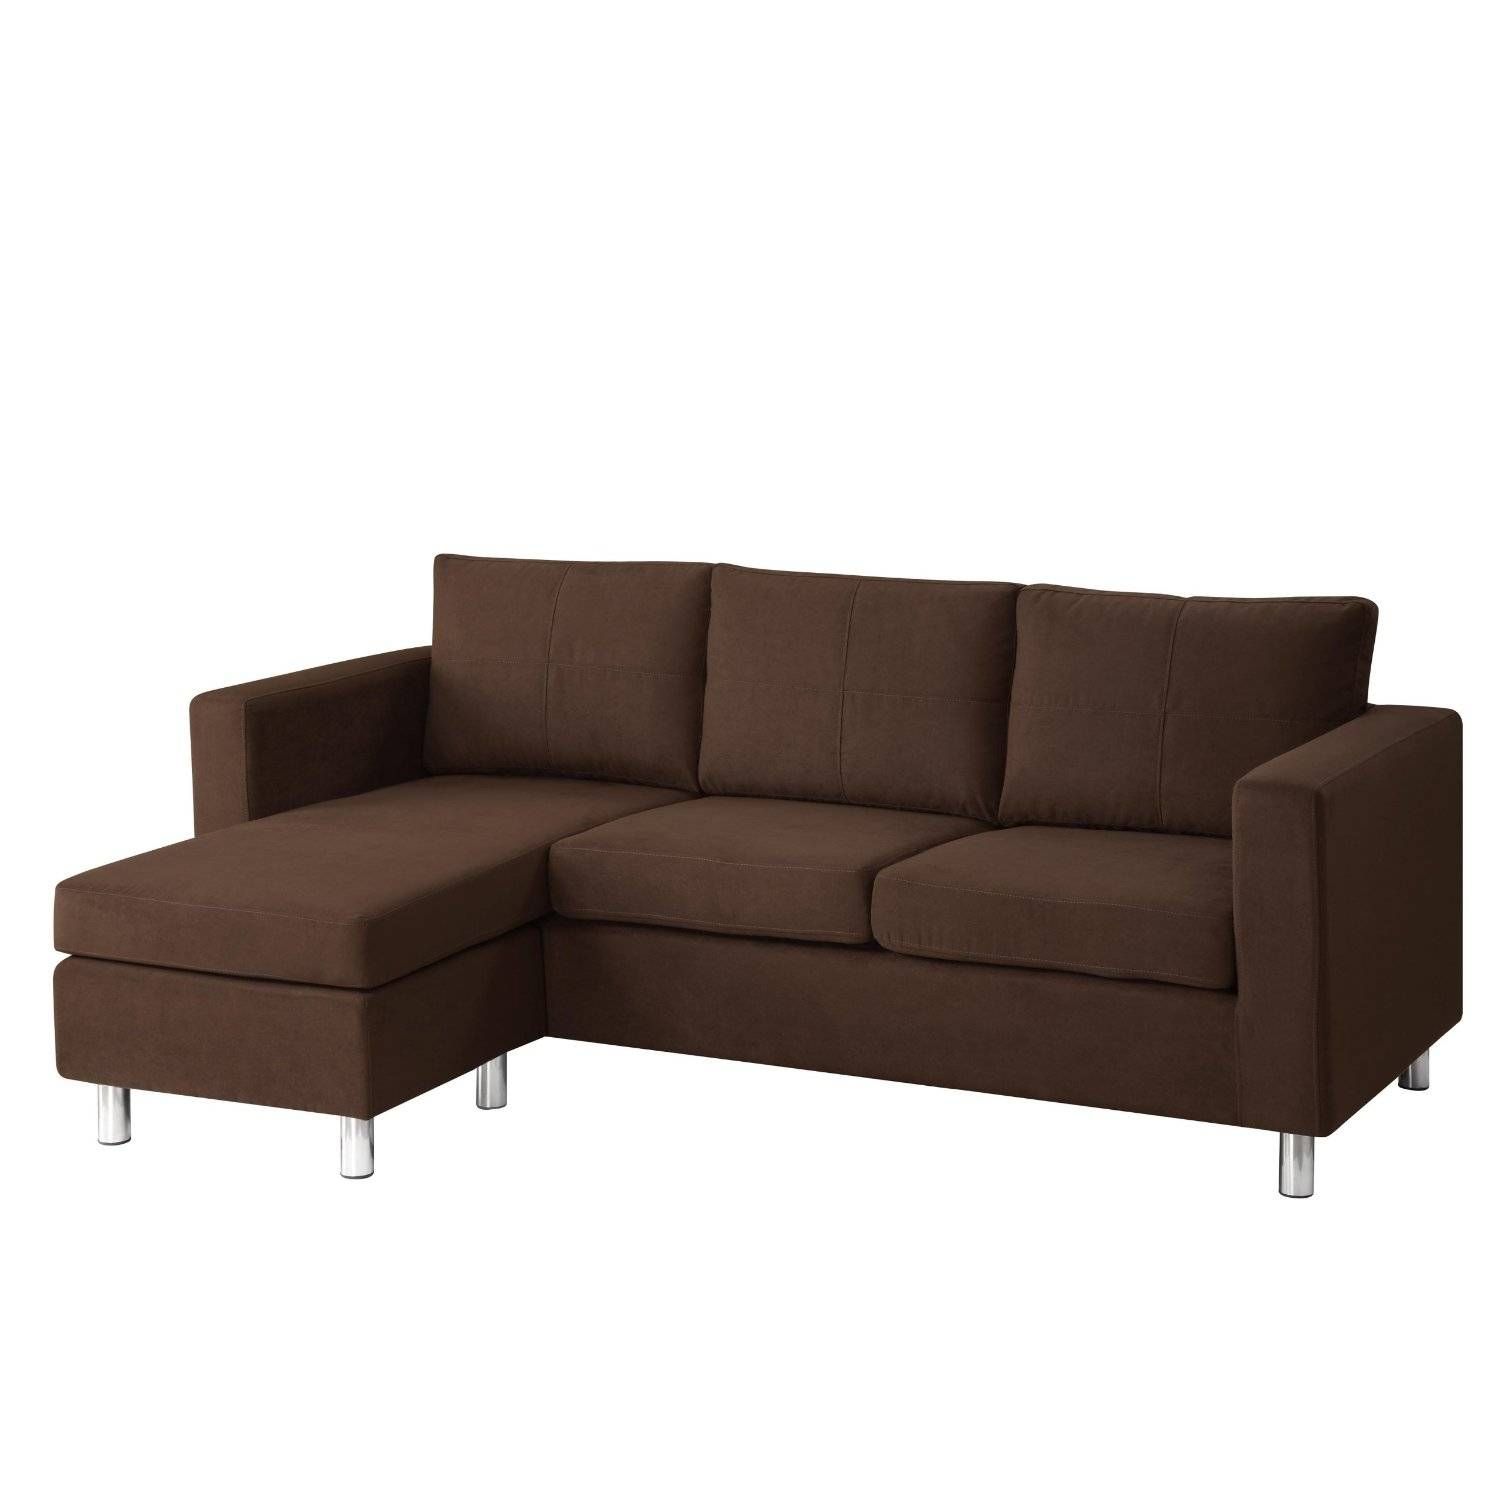 Small Terracota Armless Sectional Sofas With Sleeper – S3net With Regard To Small Armless Sofa (Photo 26 of 26)